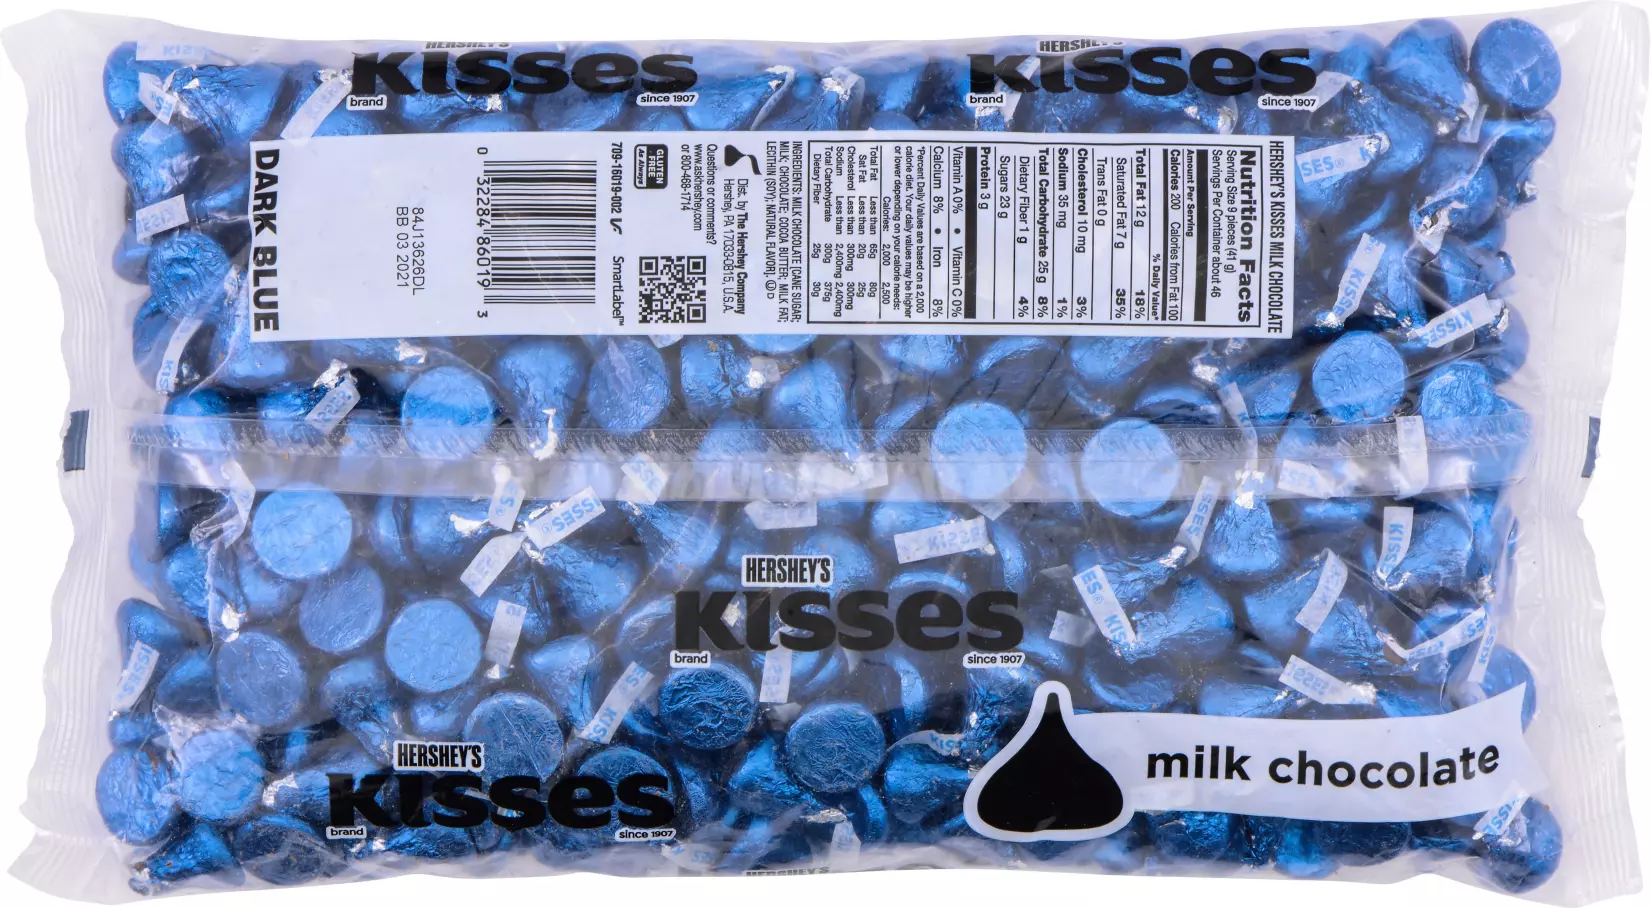 HERSHEY'S KISSES Dark Blue Foil Milk Chocolate Candy, 66.67 oz bag, 400 pieces - Back of Package